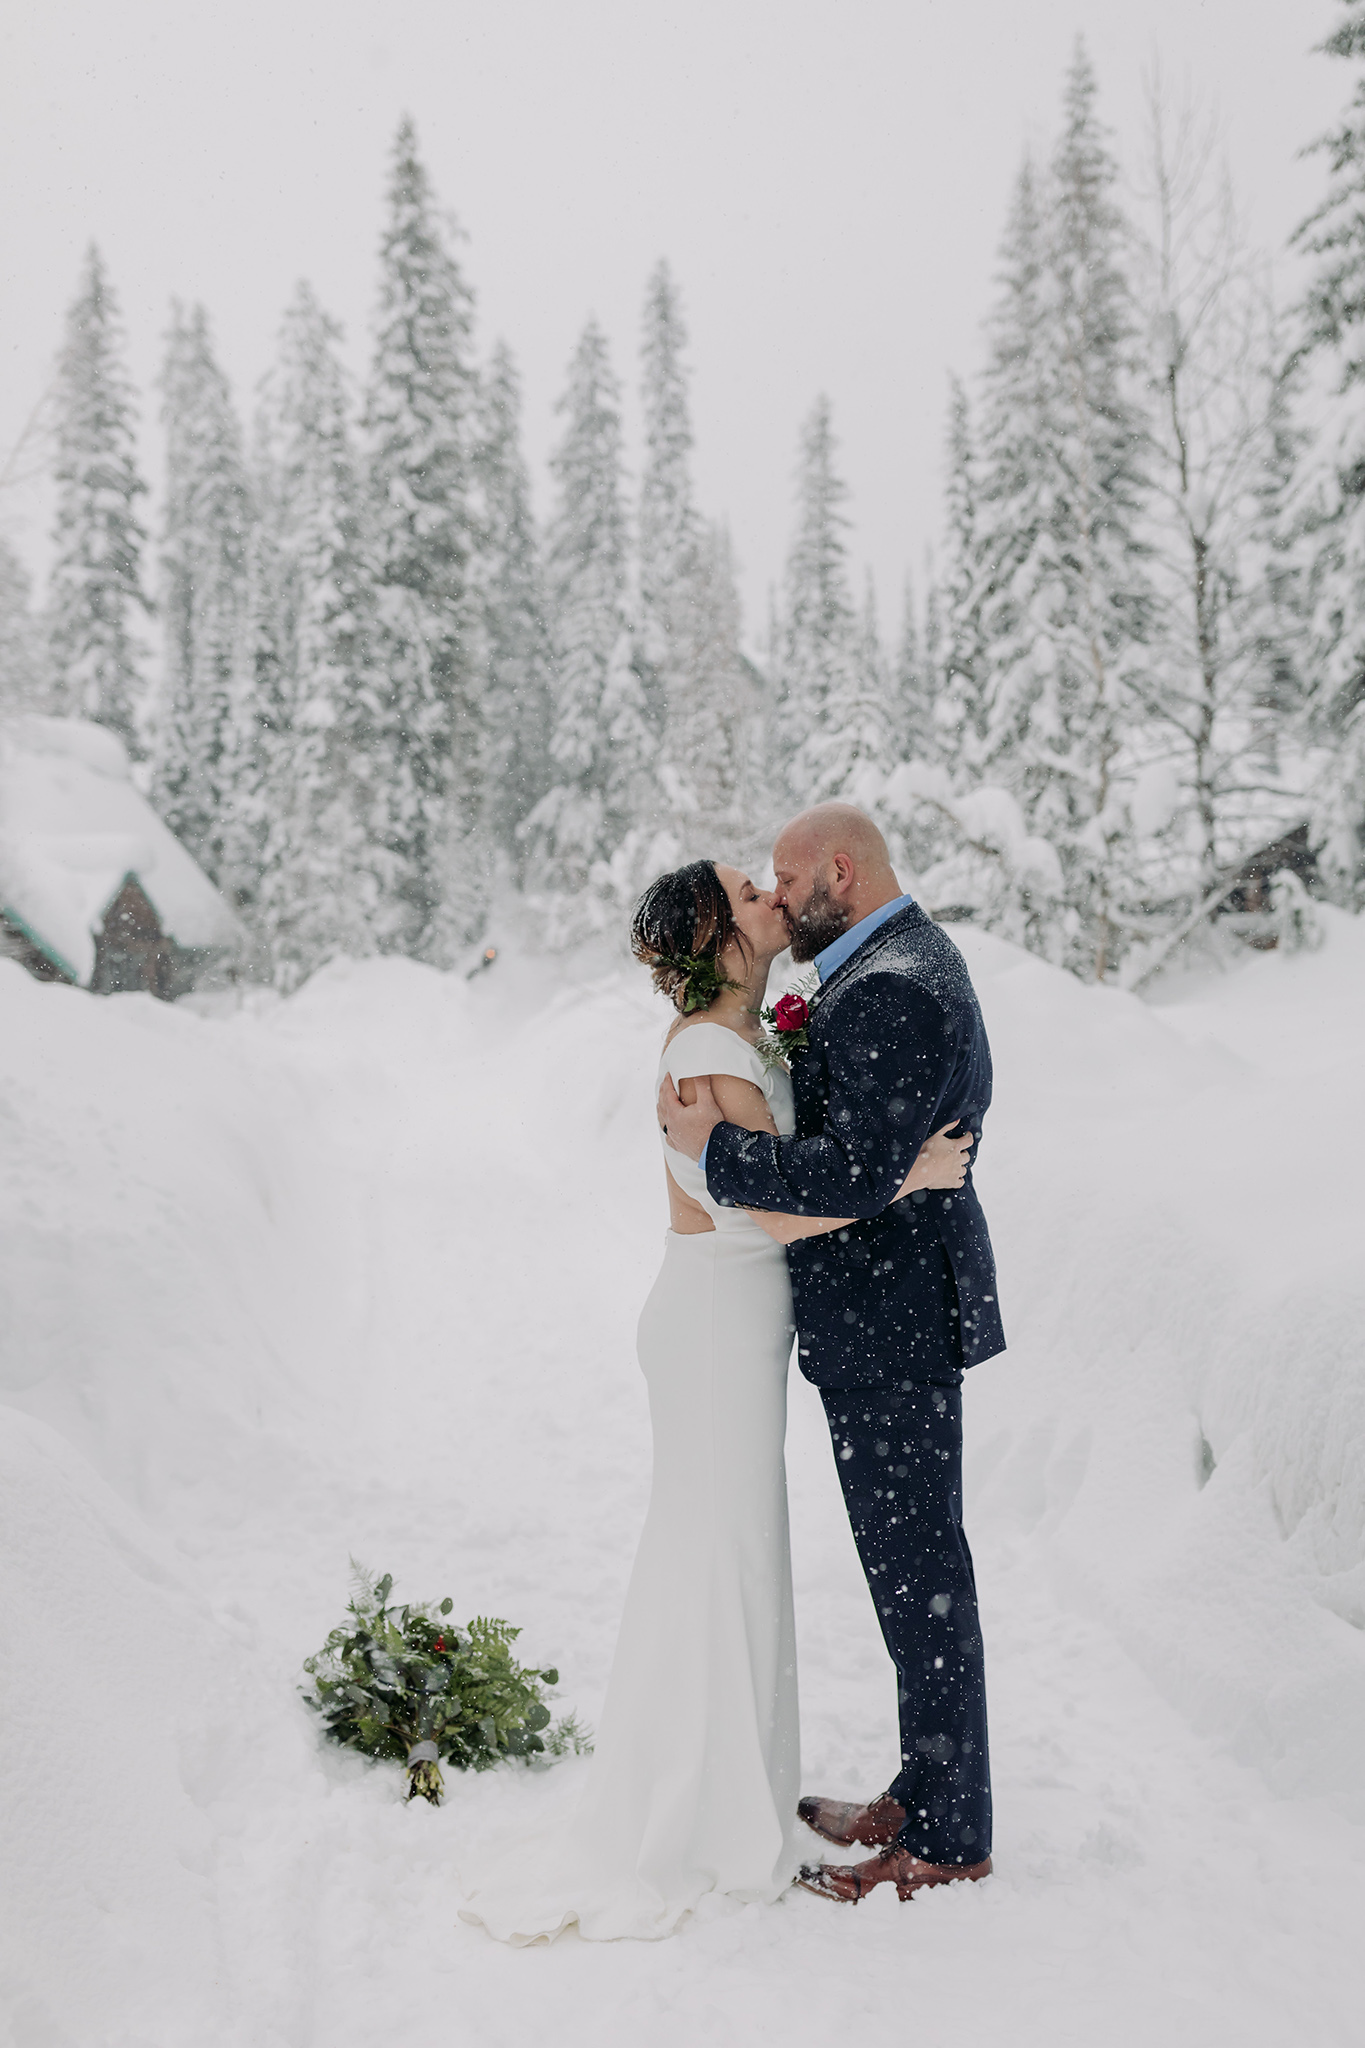 Emerald Lake Lodge winter elopement outdoor wedding ceremony in the pathway amongst the cabin with a natural tree arch with falling snow photographed by mountain elopement & wedding photographer ENV Photography